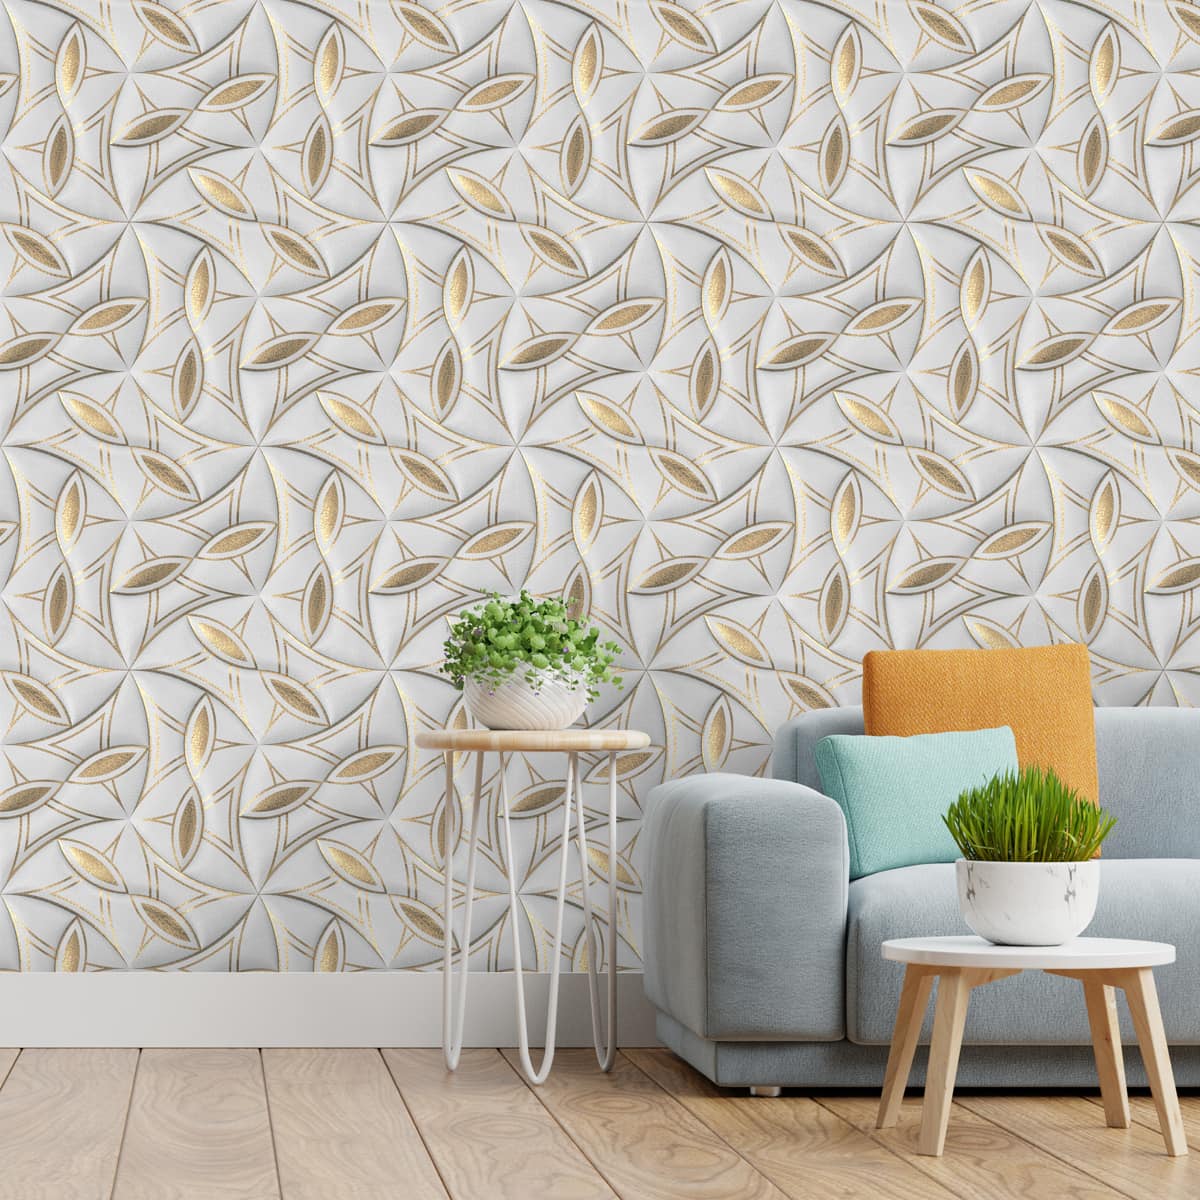 3D Wallpaper for Walls, White and Golden Leaves